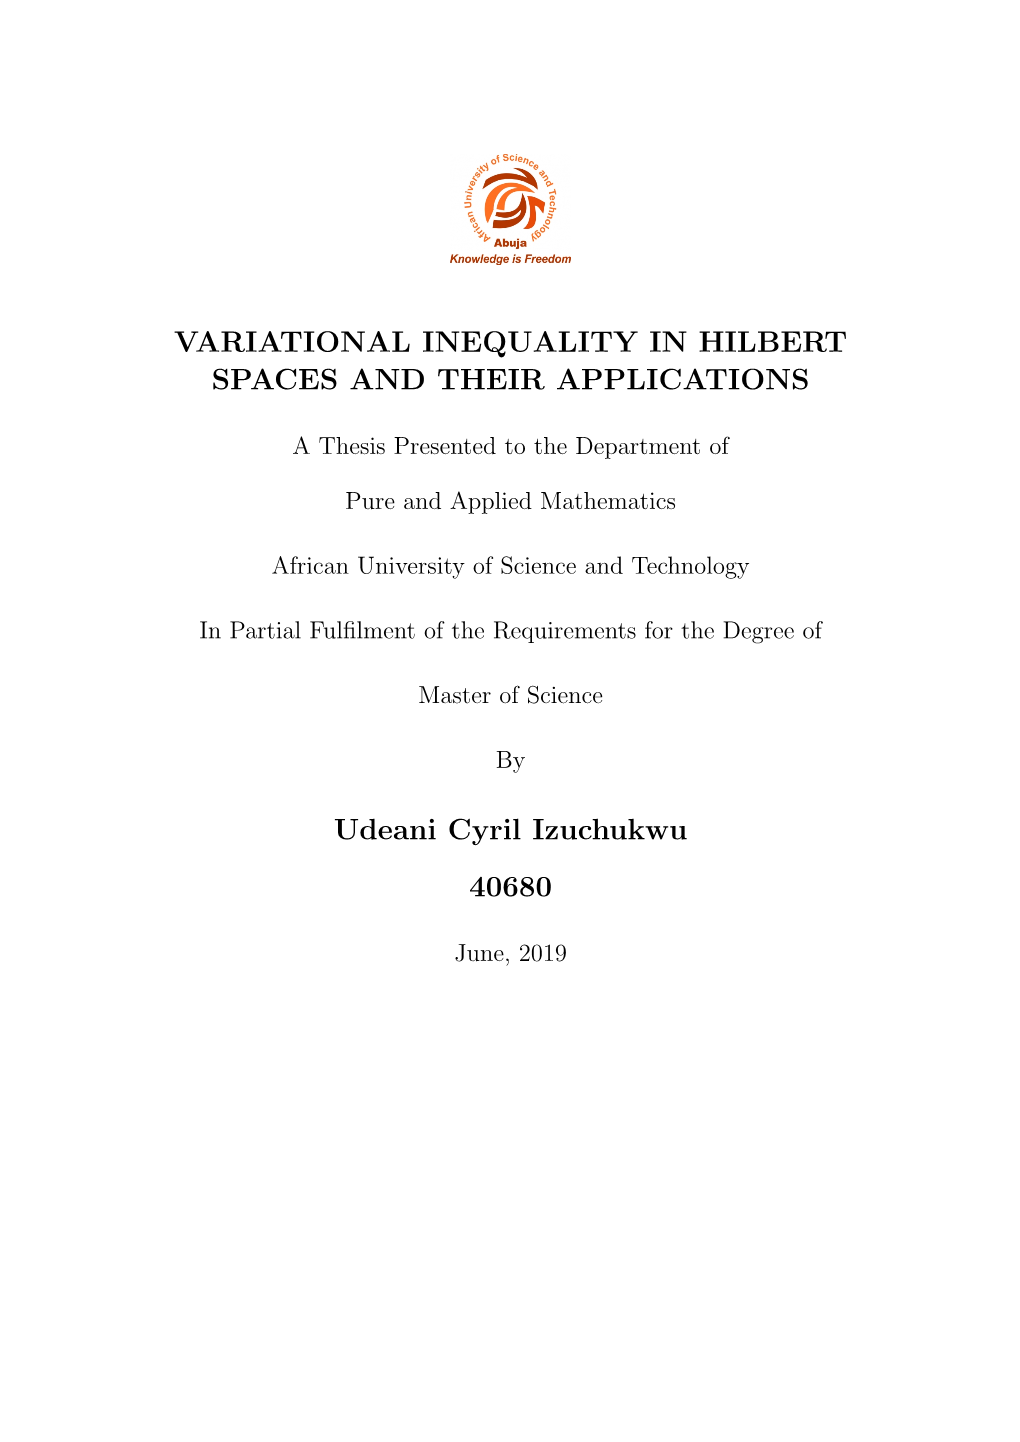 VARIATIONAL INEQUALITY in HILBERT SPACES and THEIR APPLICATIONS Udeani Cyril Izuchukwu 40680